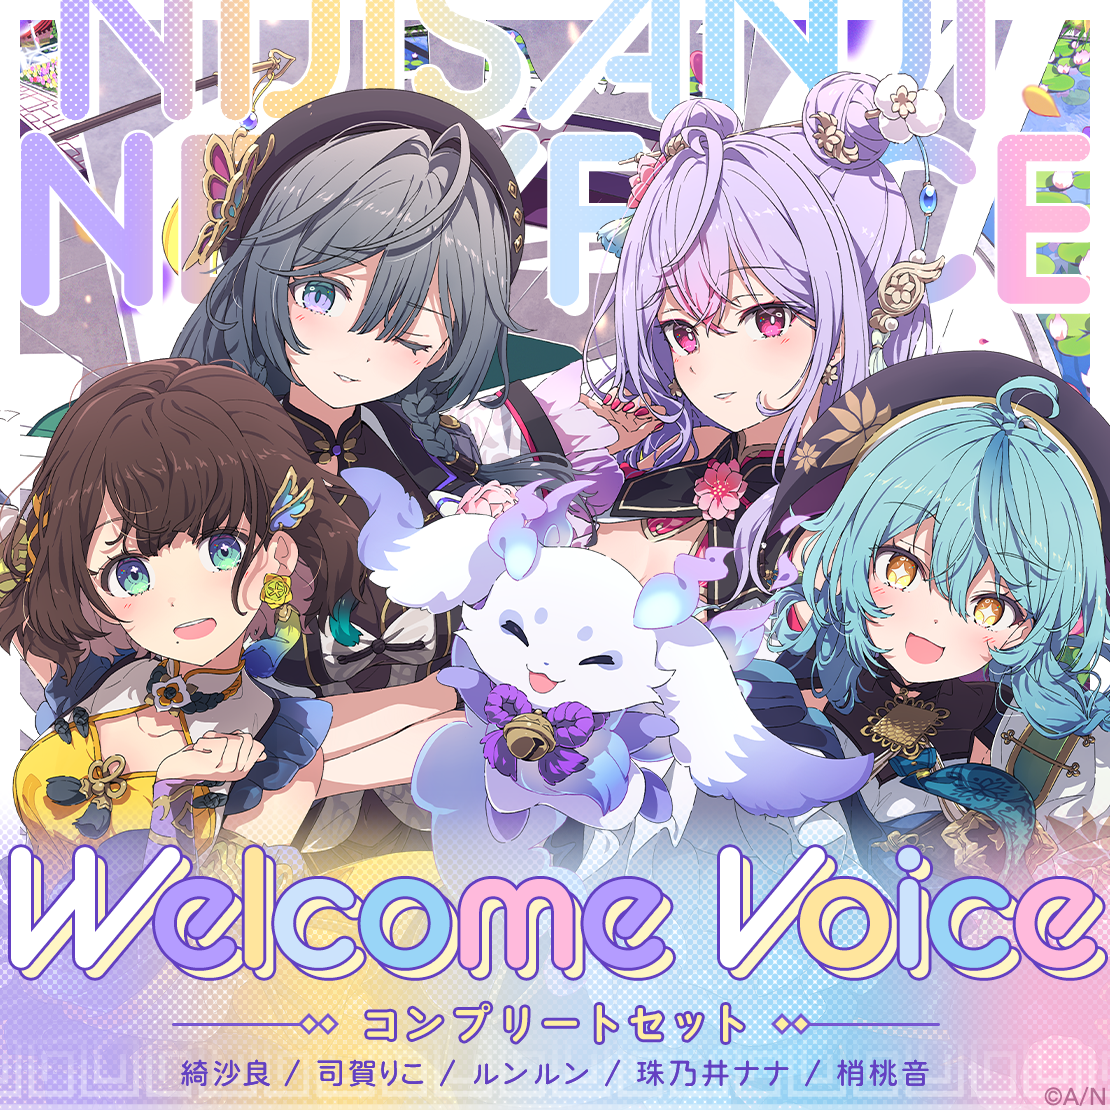 【Welcome Voice】いずれ菖蒲か杜若 コンプリートセット